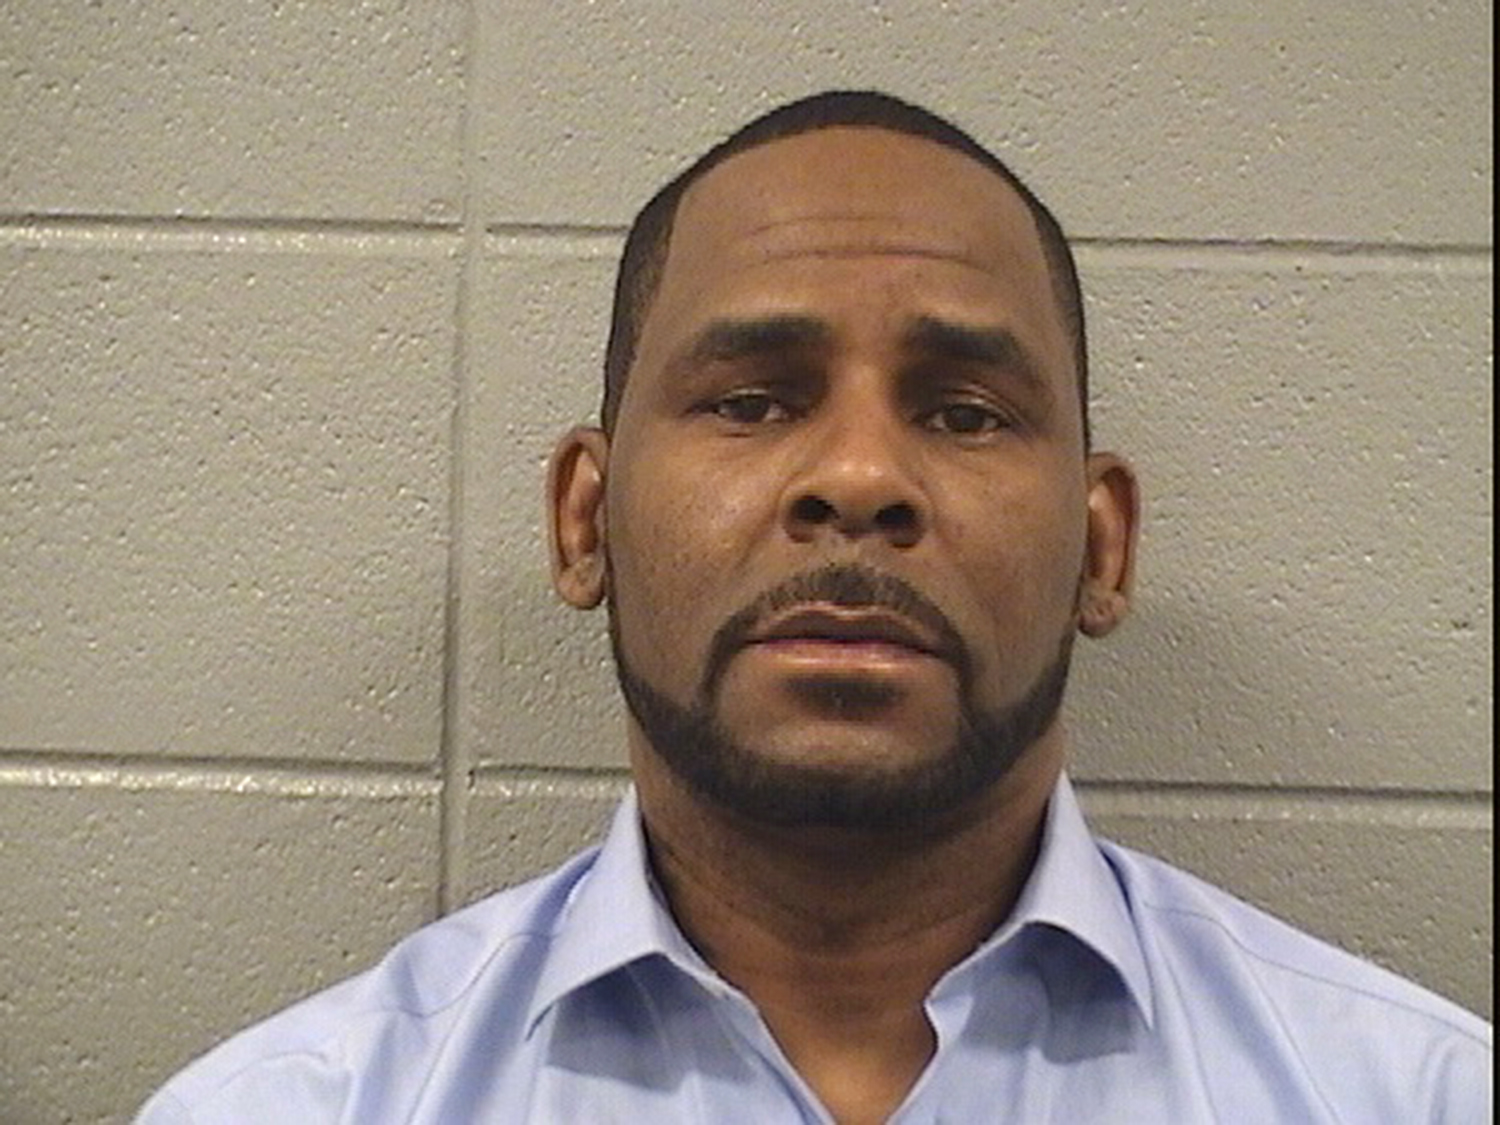 R. Kelly Pleads Not Guilty On NYC Sex Trafficking Charges